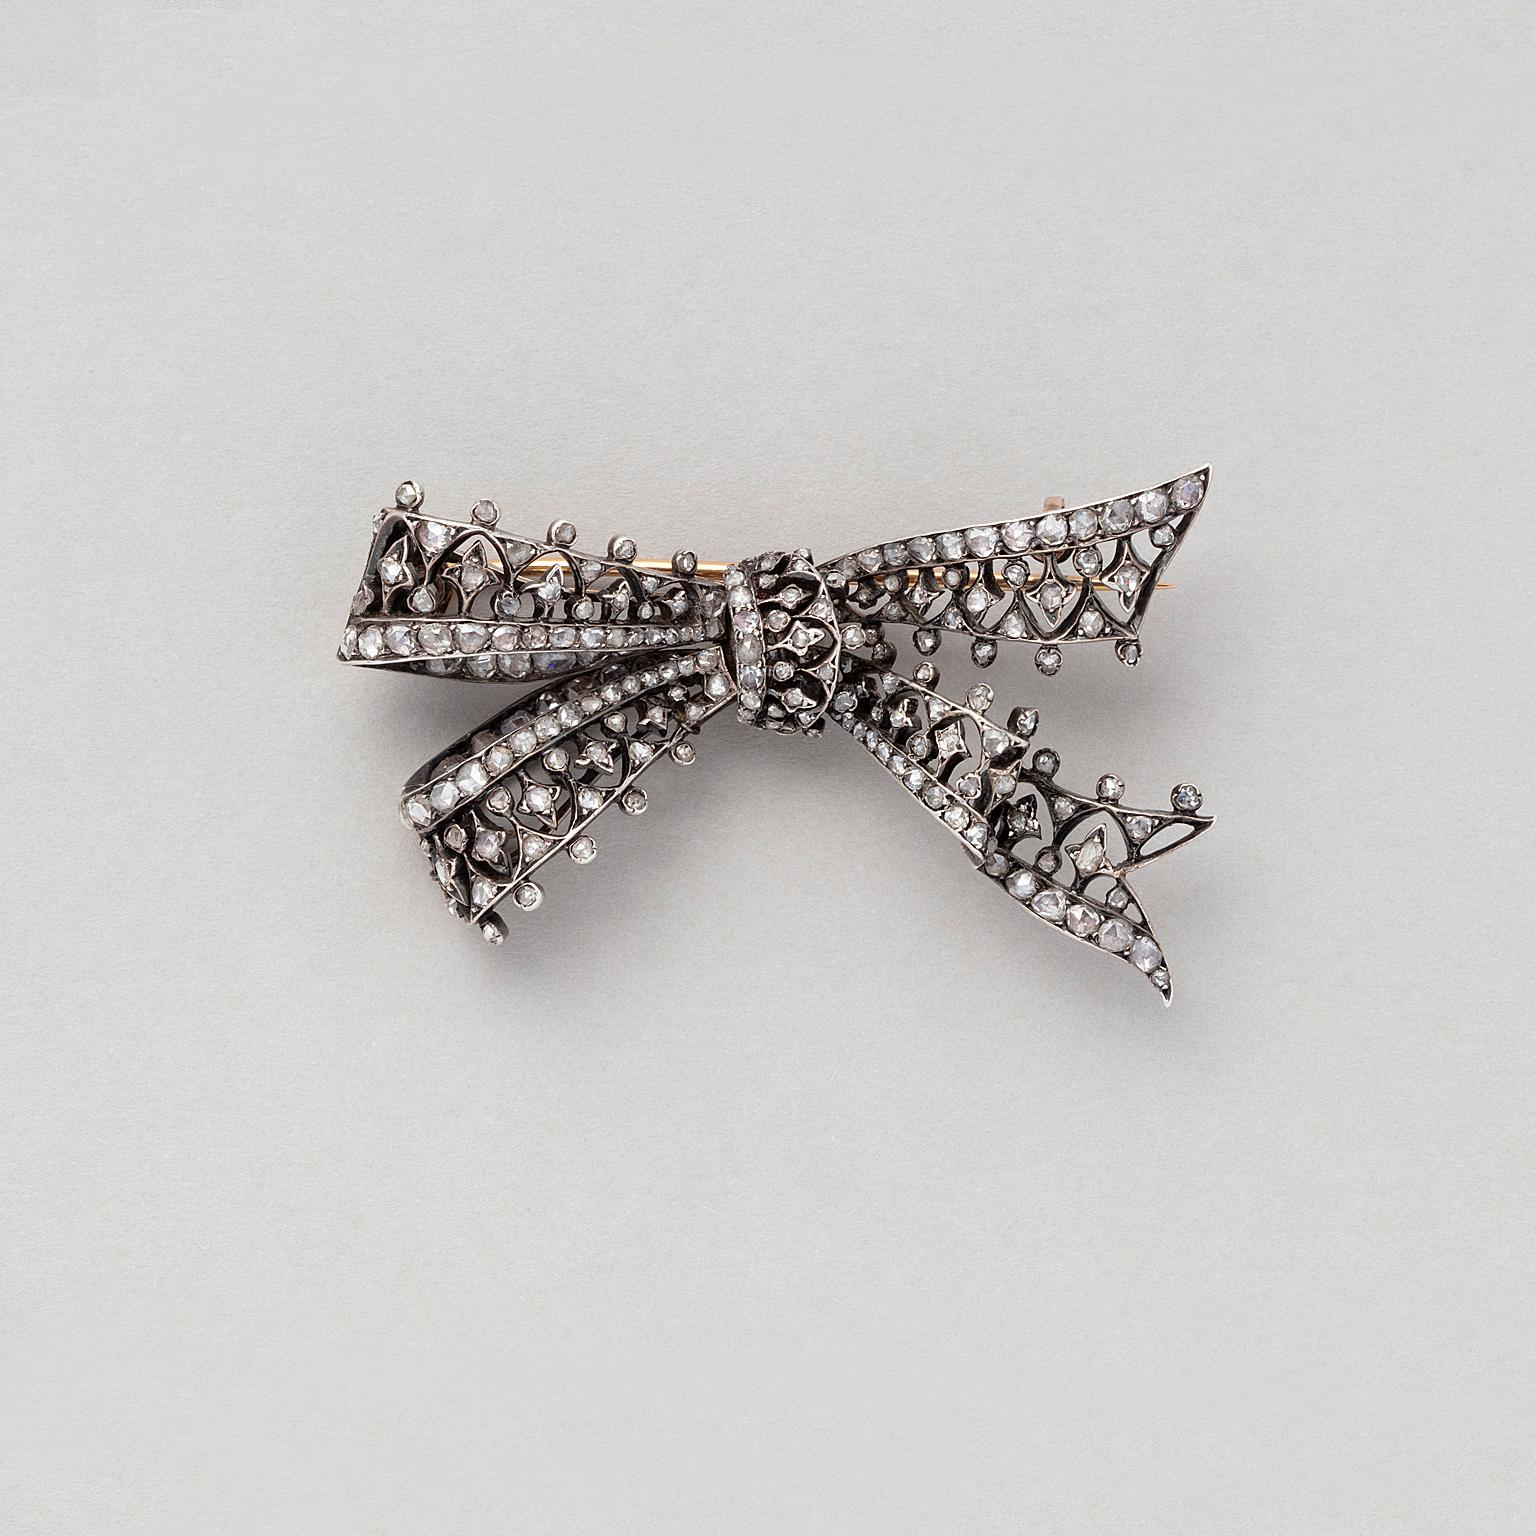 An 18 carat gold bow brooch open worked and set with rose cut diamonds, numbered, 657, with French assay marks, France, circa 1880.

weight: 16.15 grams
dimensions: 6 x 4 cm